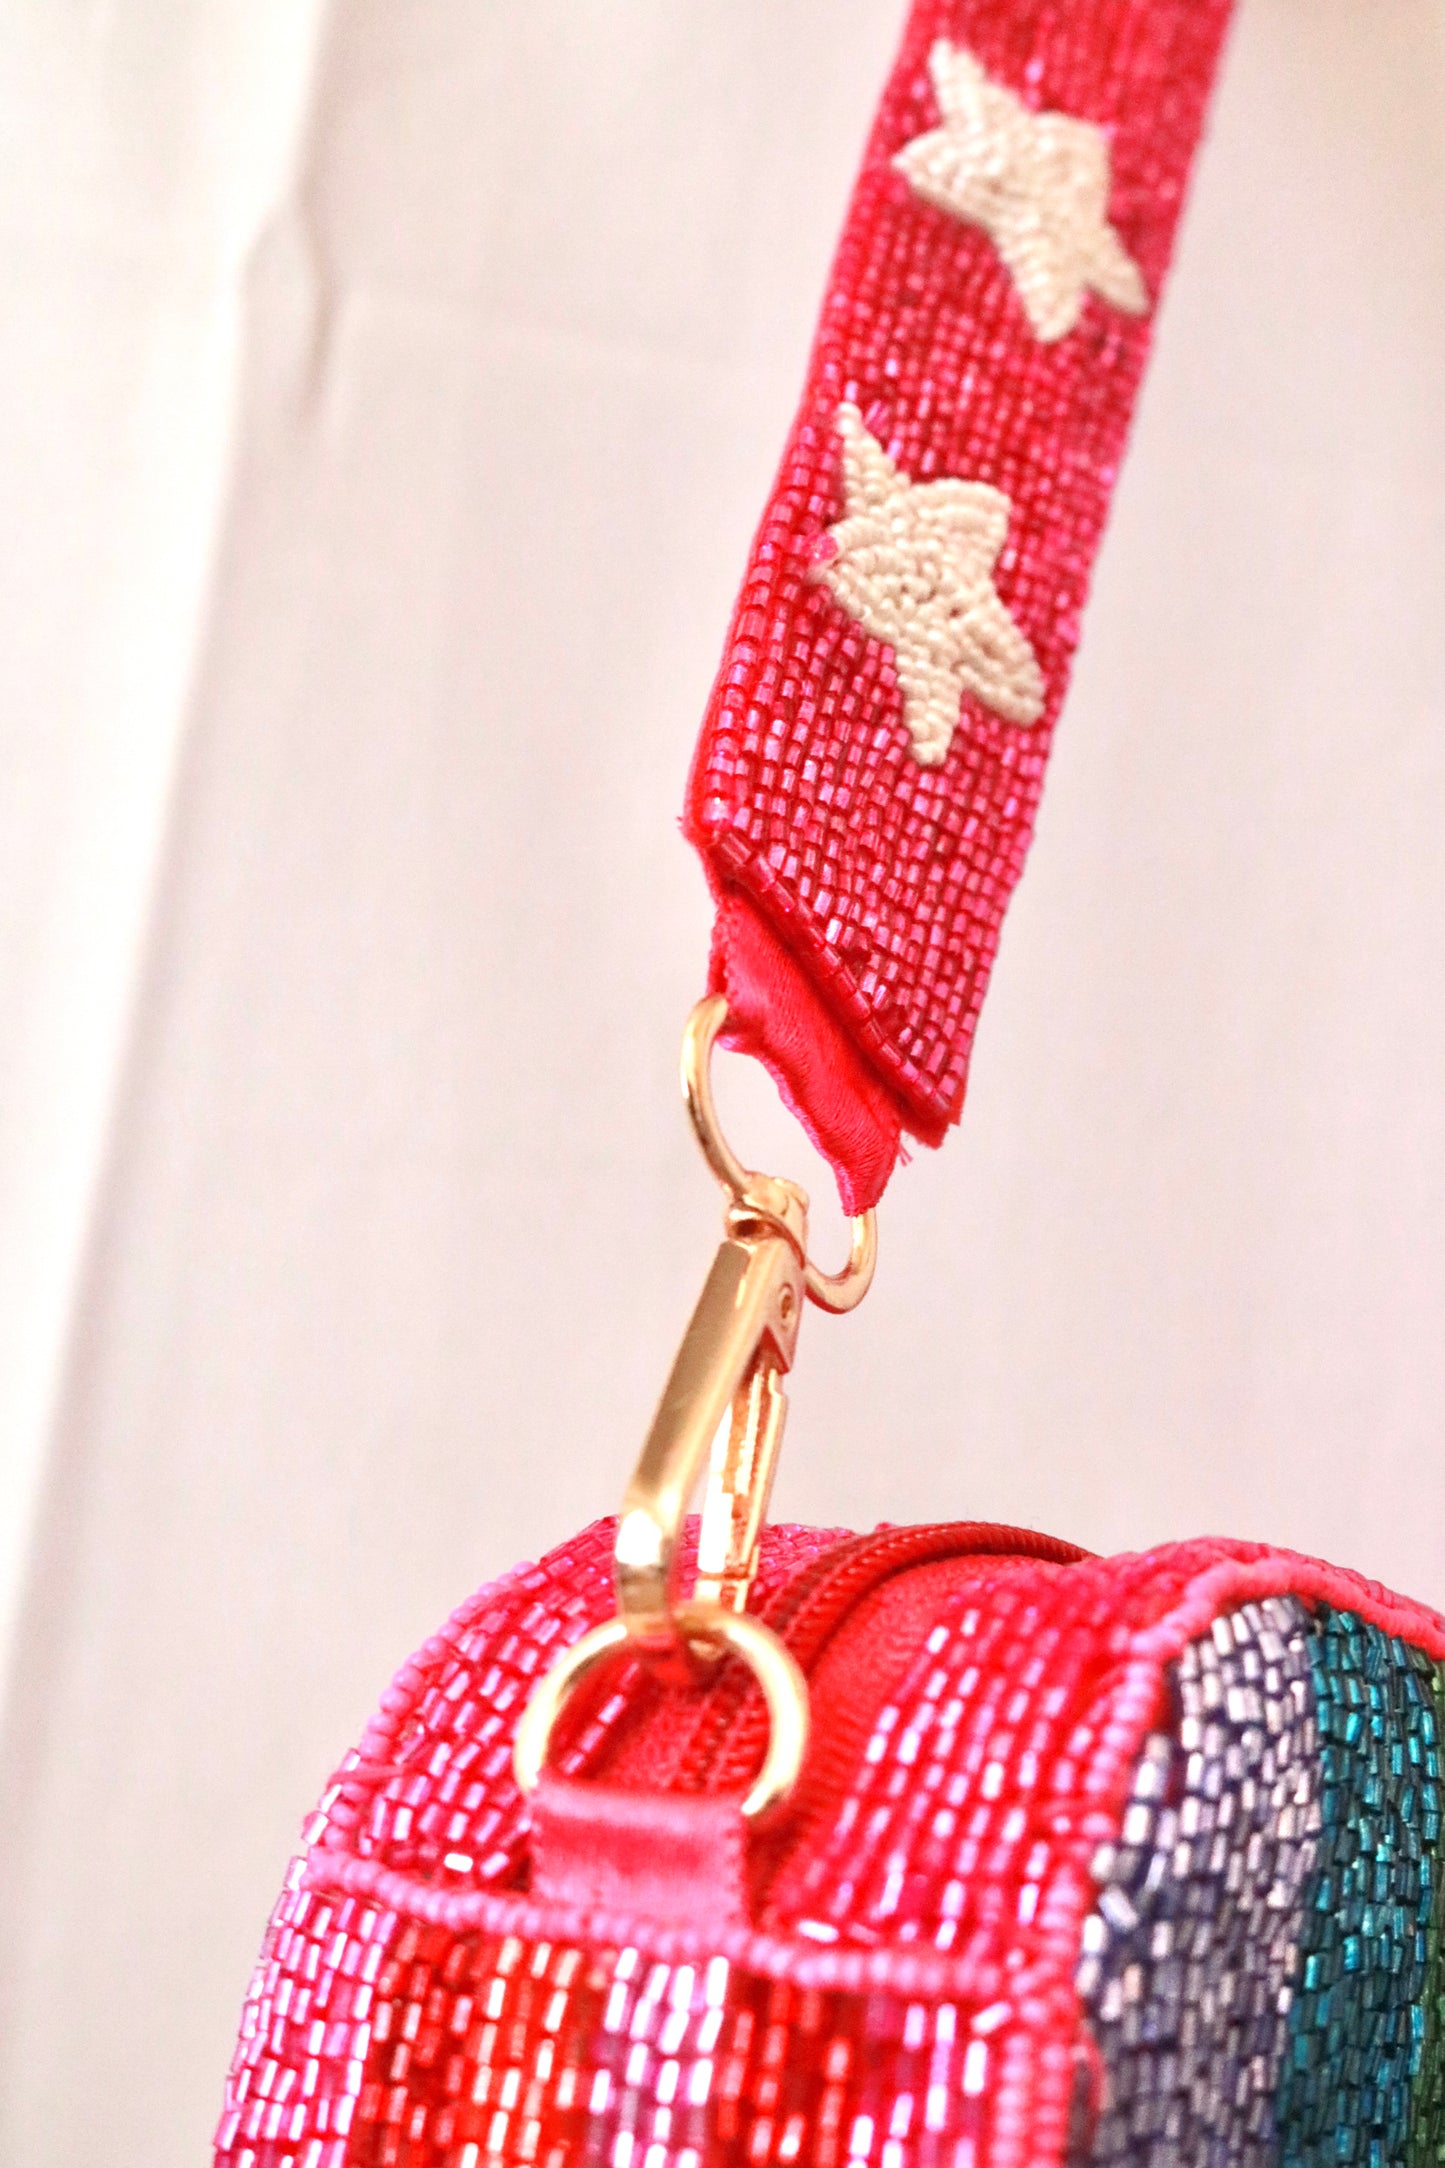 The Bejeweled Bag